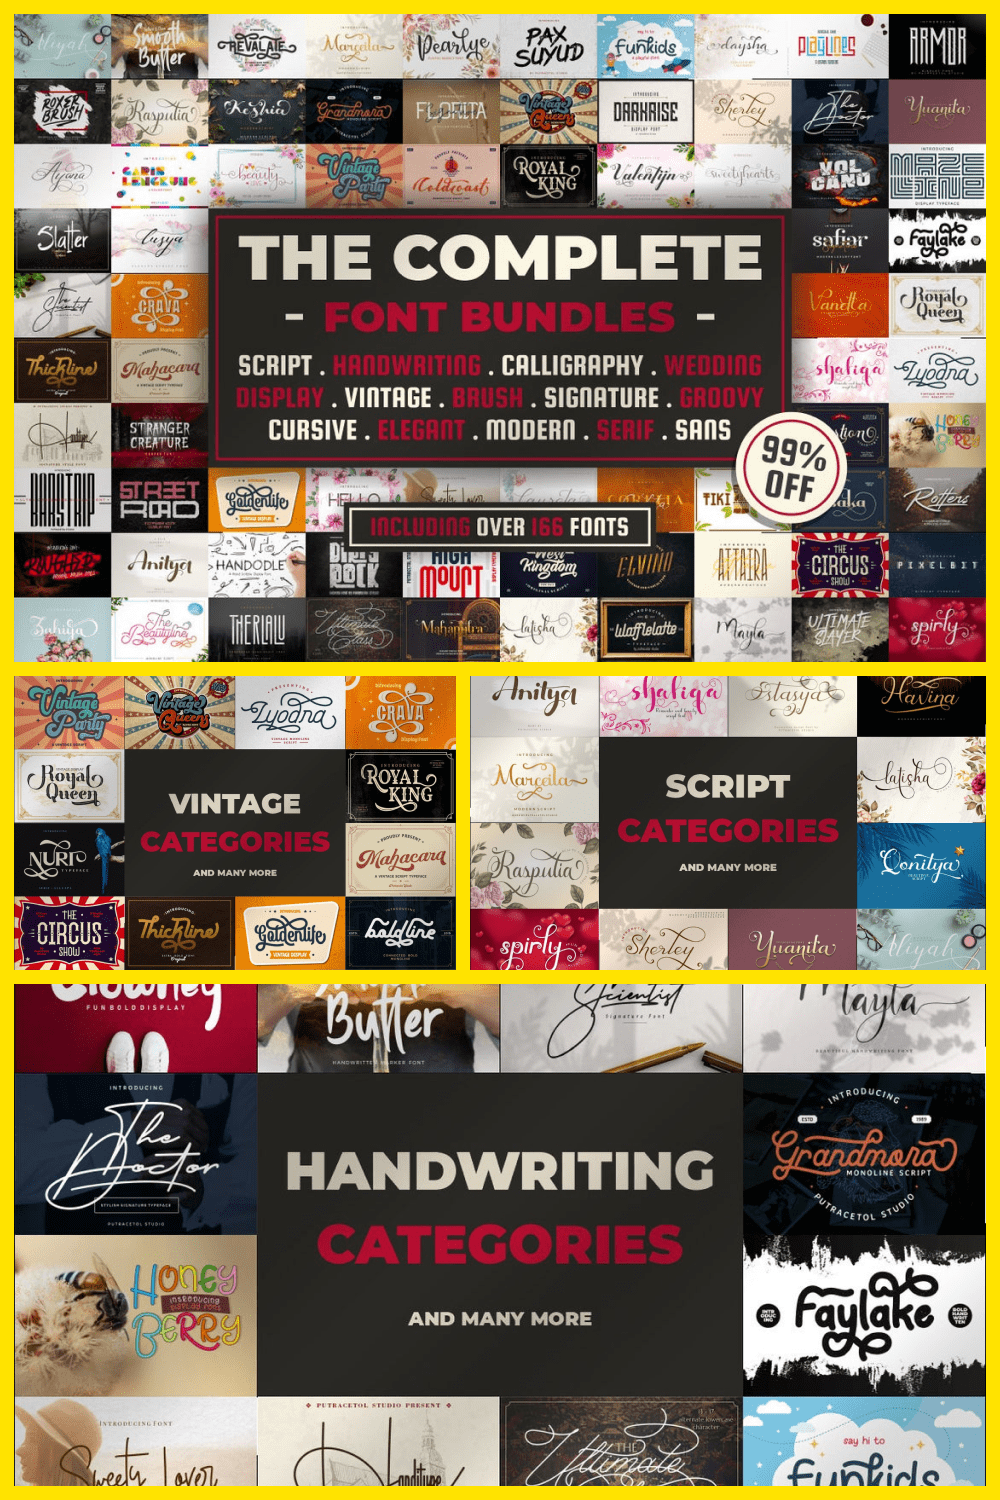 This huge collection of fonts will save you on a variety of projects.